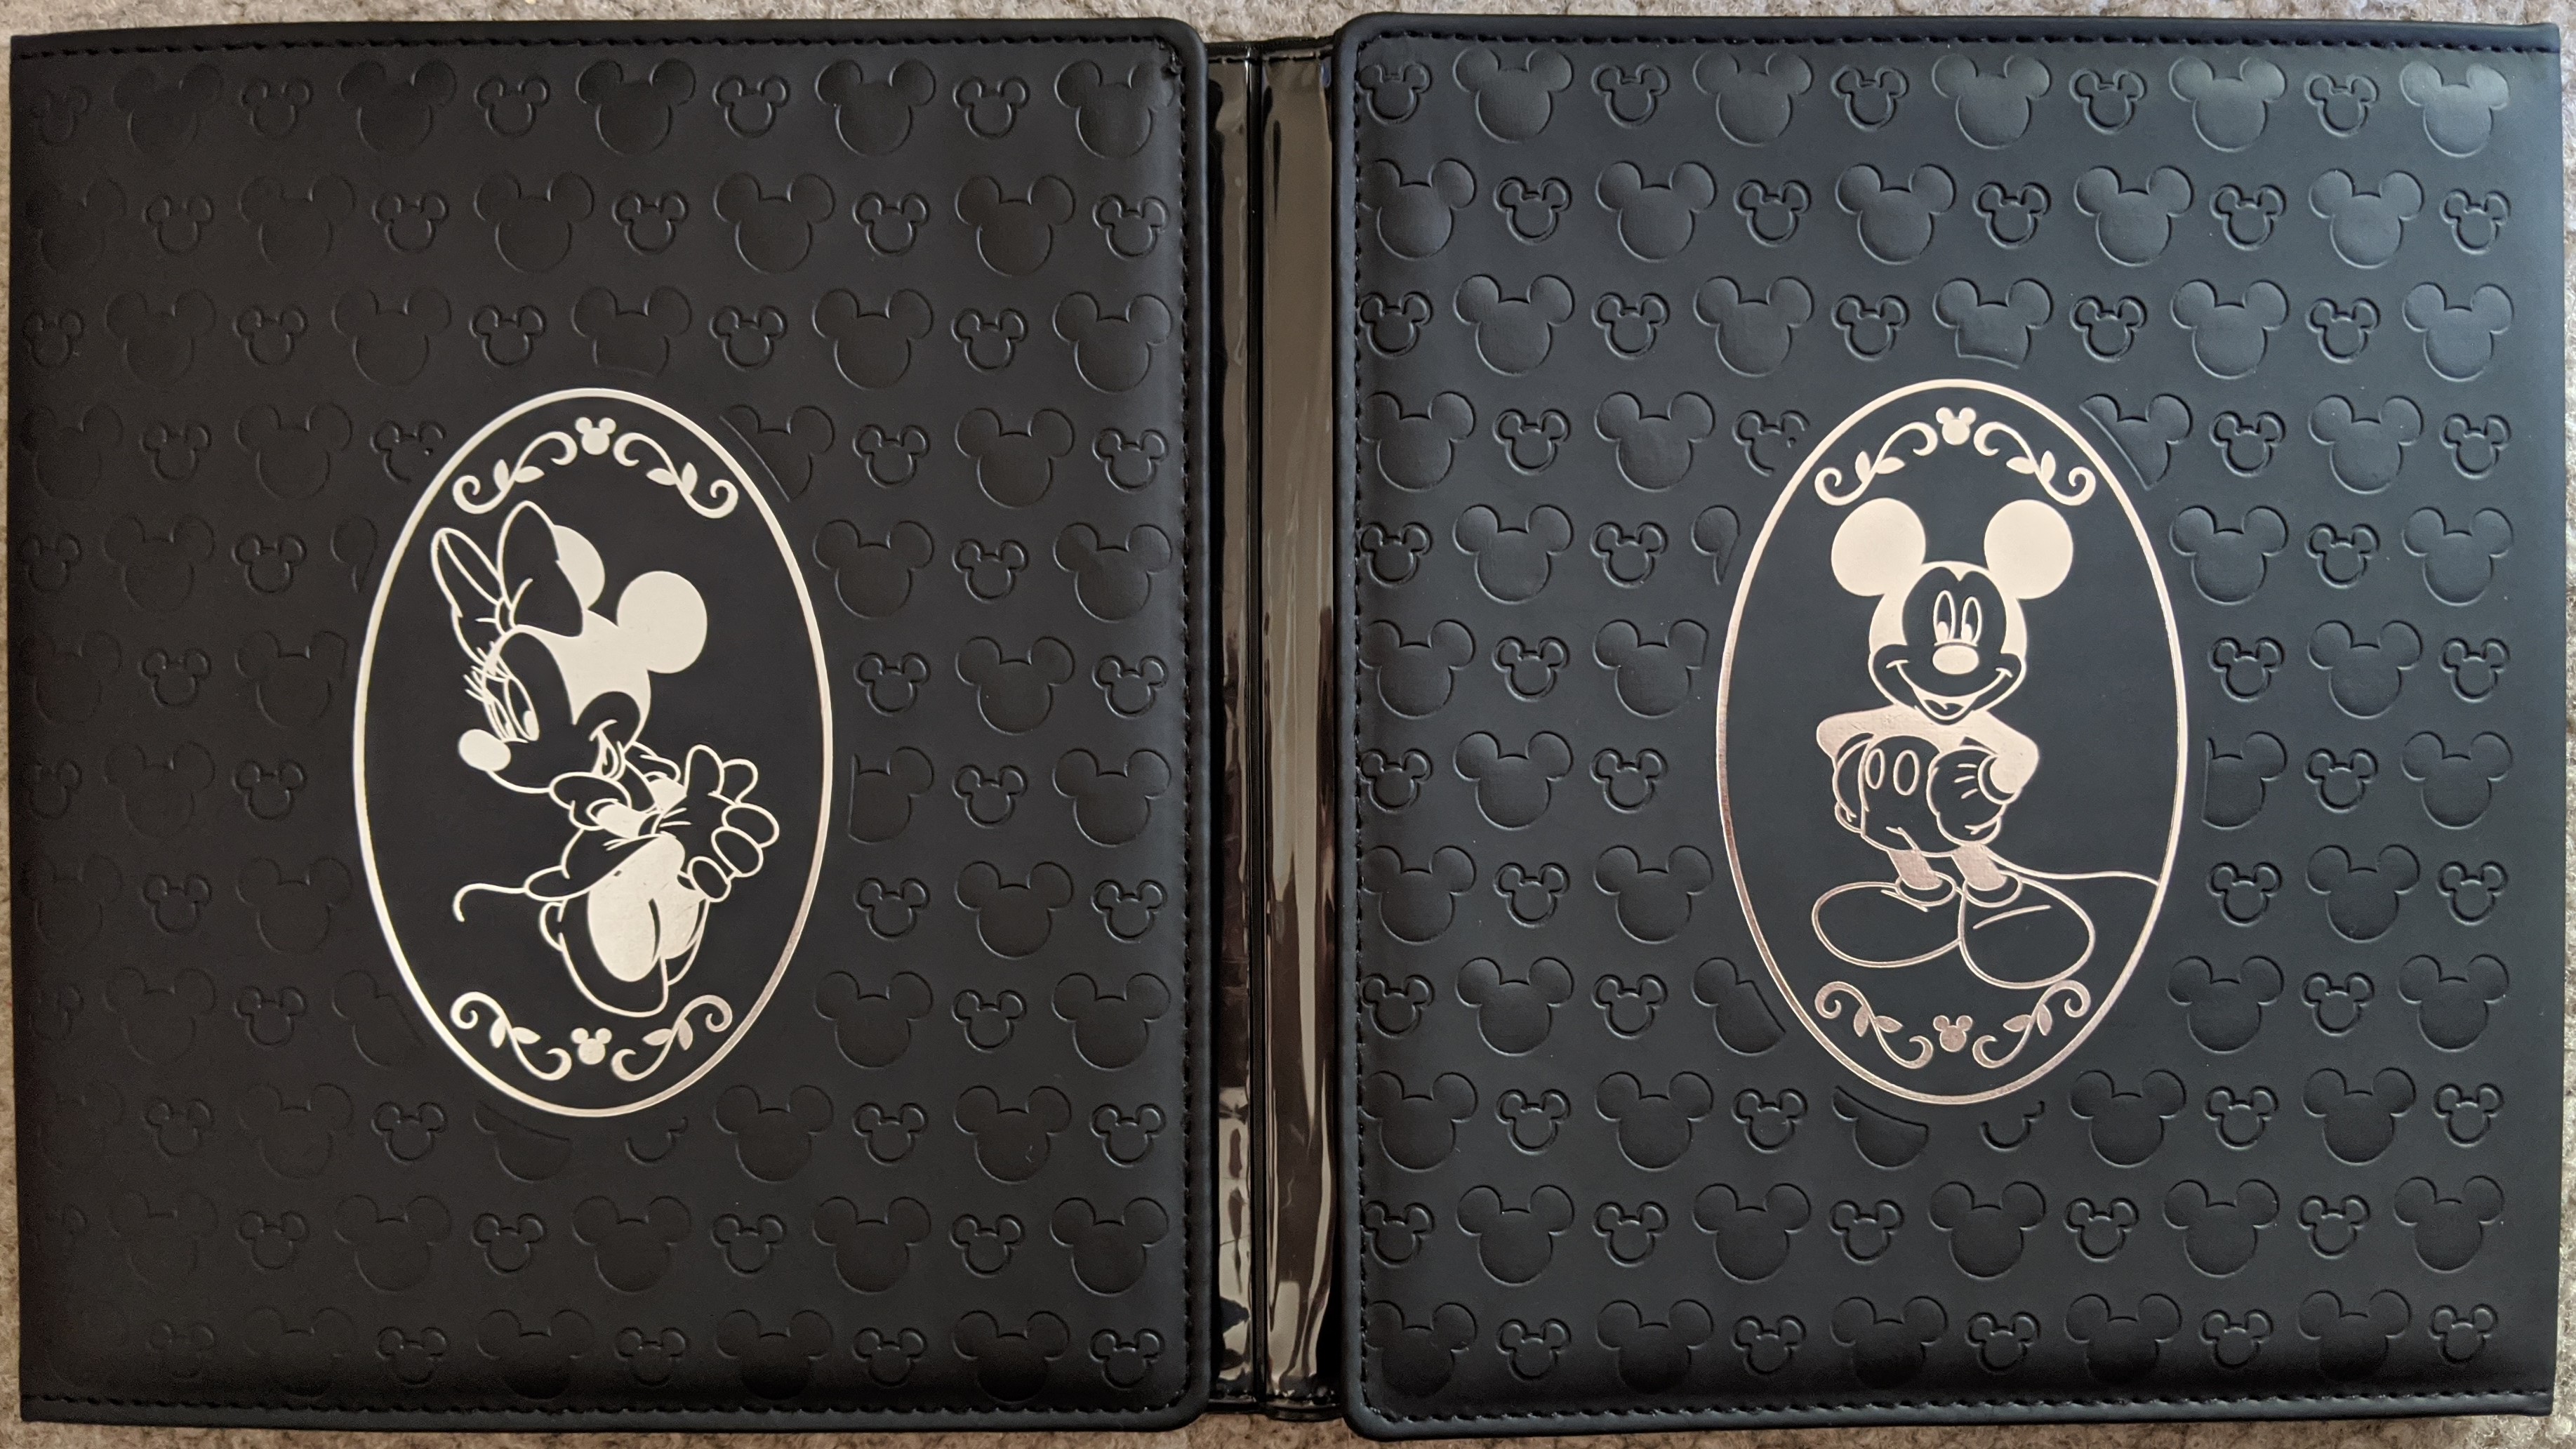 Pressed Penny Collection Books and Holders from Hong Kong Disneyland